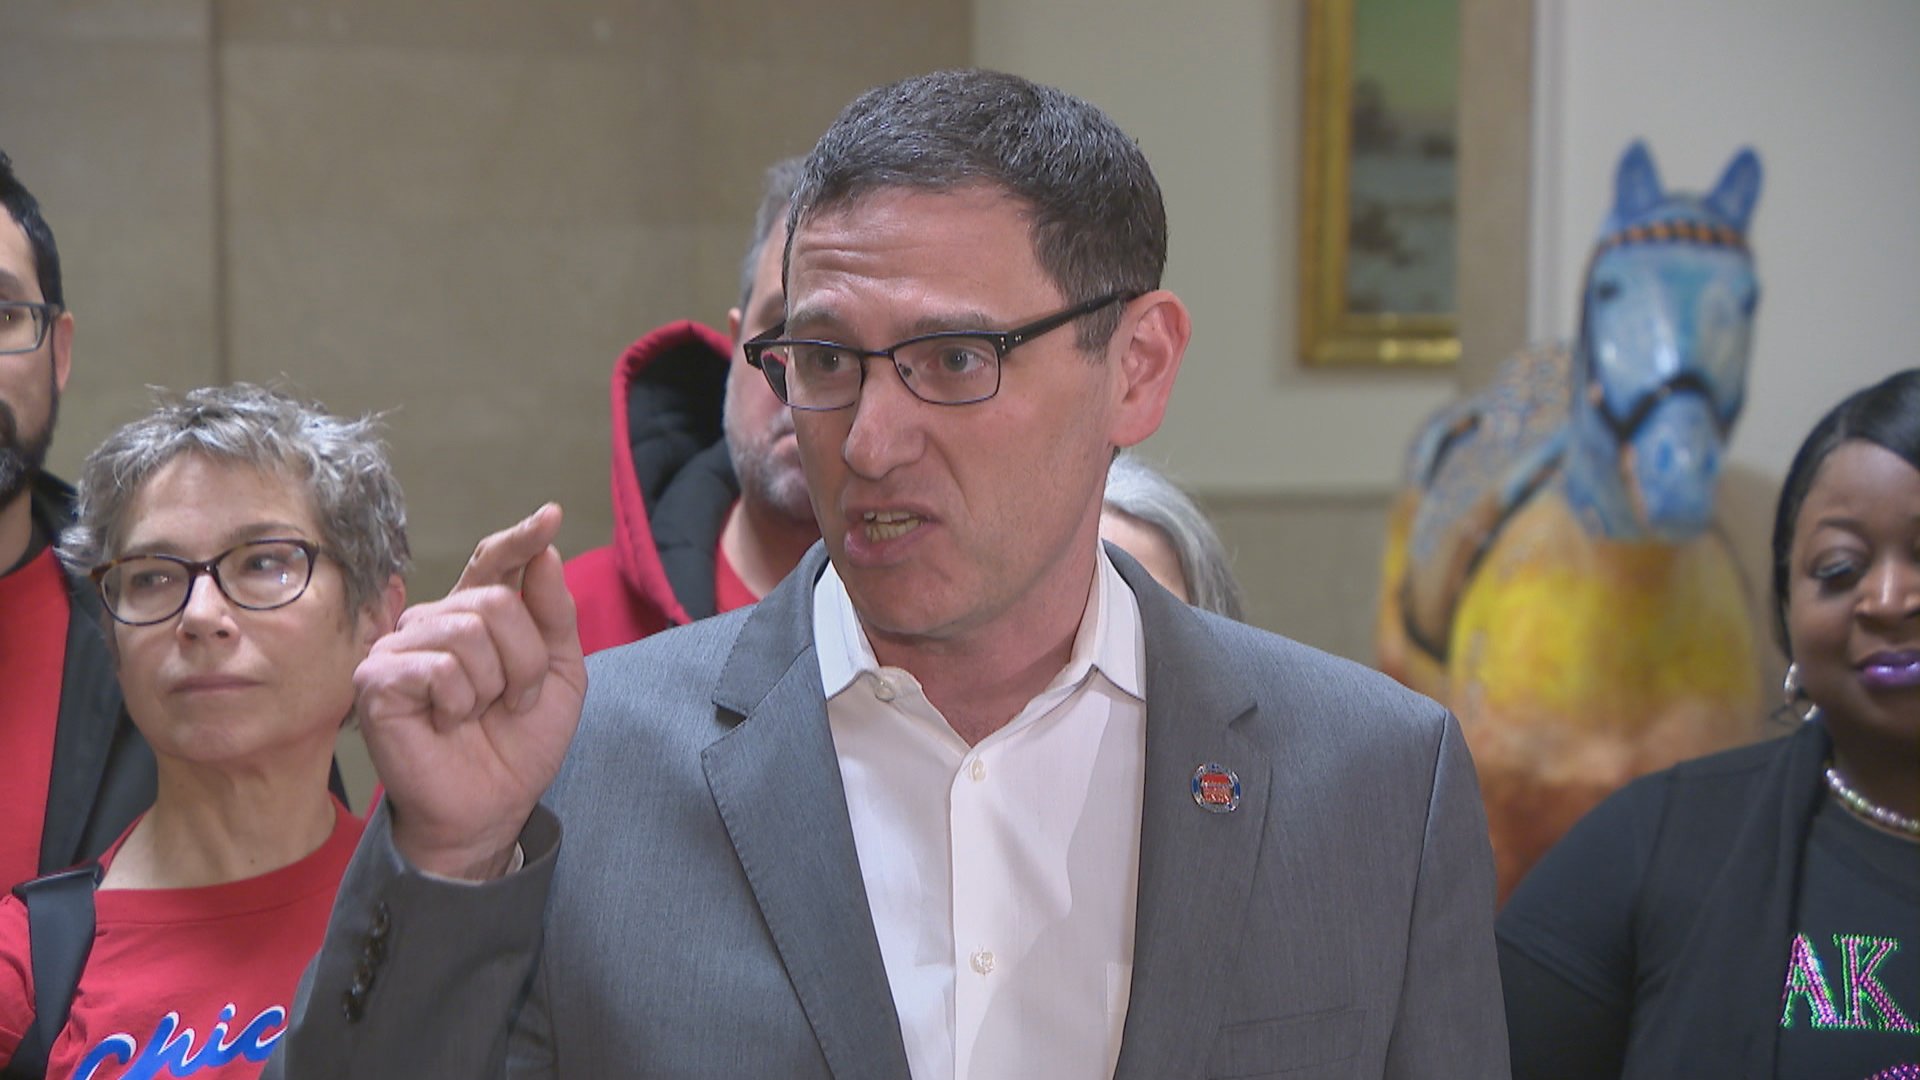 CTU President Jesse Sharkey outlines his union’s contract demands in a press conference inside City Hall on Jan. 15, 2019. (Chicago Tonight)